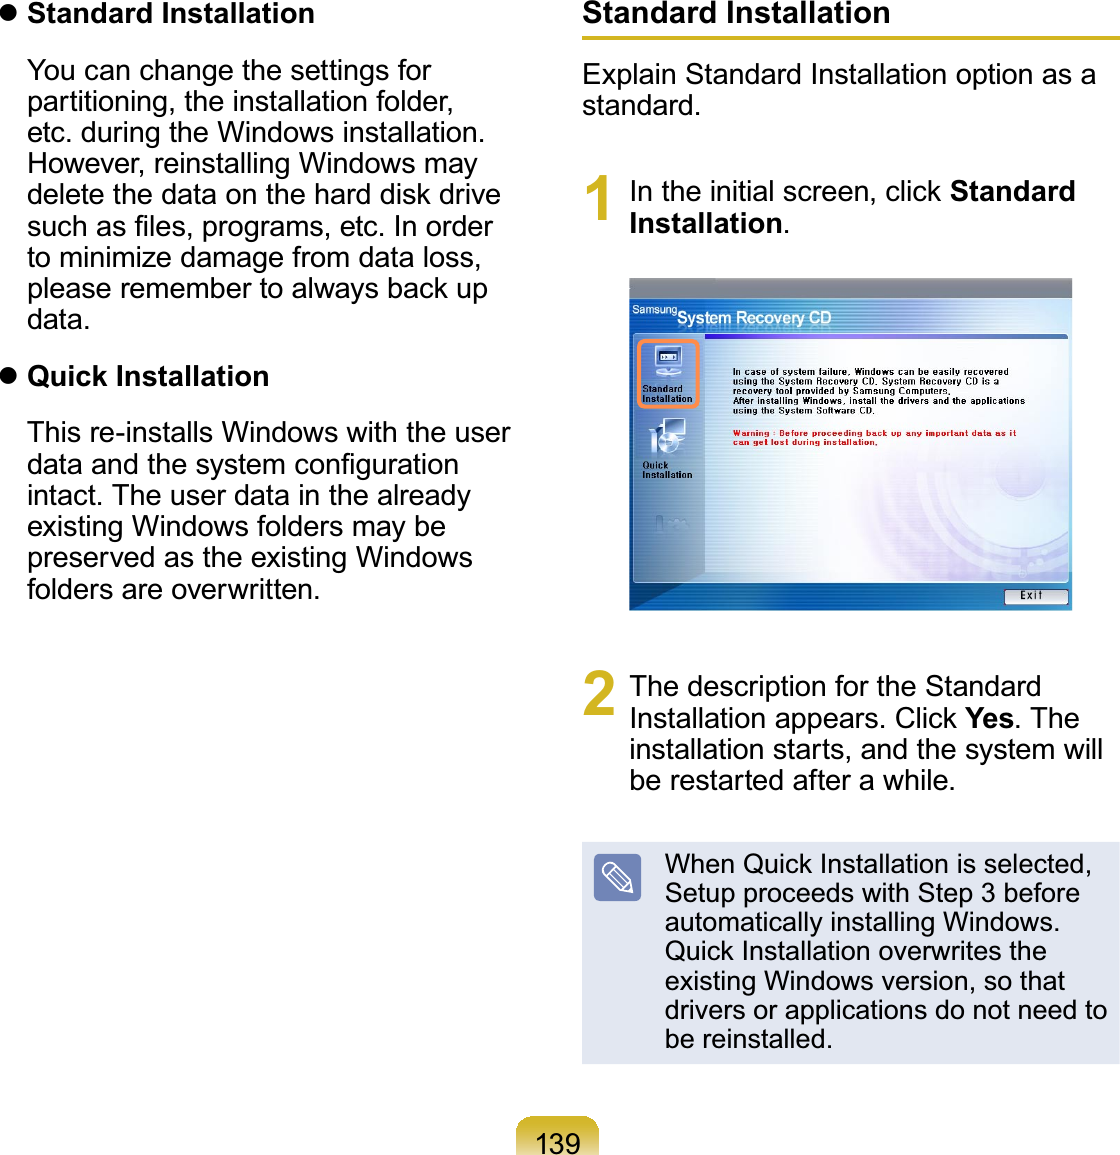 139zStandard InstallationYou can change the settings forpartitioning, the installation folder,etc. during the Windows installation.However, reinstalling Windows mayGHOHWHWKHGDWDRQWKHKDUGGLVNGULYHVXFKDV¿OHVSURJUDPVHWF,QRUGHUto minimize damage from data loss,SOHDVHUHPHPEHUWRDOZD\VEDFNXSdata.zQuick Installation This re-installs Windows with the userGDWDDQGWKHV\VWHPFRQ¿JXUDWLRQintact. The user data in the alreadyexisting Windows folders may bepreserved as the existing Windowsfolders are overwritten.Standard InstallationExplain Standard Installation option as astandard.1 ,QWKHLQLWLDOVFUHHQFOLFNStandard Installation.2 The description for the Standard,QVWDOODWLRQDSSHDUV&amp;OLFNYes.Theinstallation starts, and the system willberestartedafterawhile.:KHQ4XLFN,QVWDOODWLRQLVVHOHFWHGSetup proceeds with Step 3 beforeautomatically installing Windows.4XLFN,QVWDOODWLRQRYHUZULWHVWKHexisting Windows version, so thatdrivers or applications do not need tobe reinstalled.